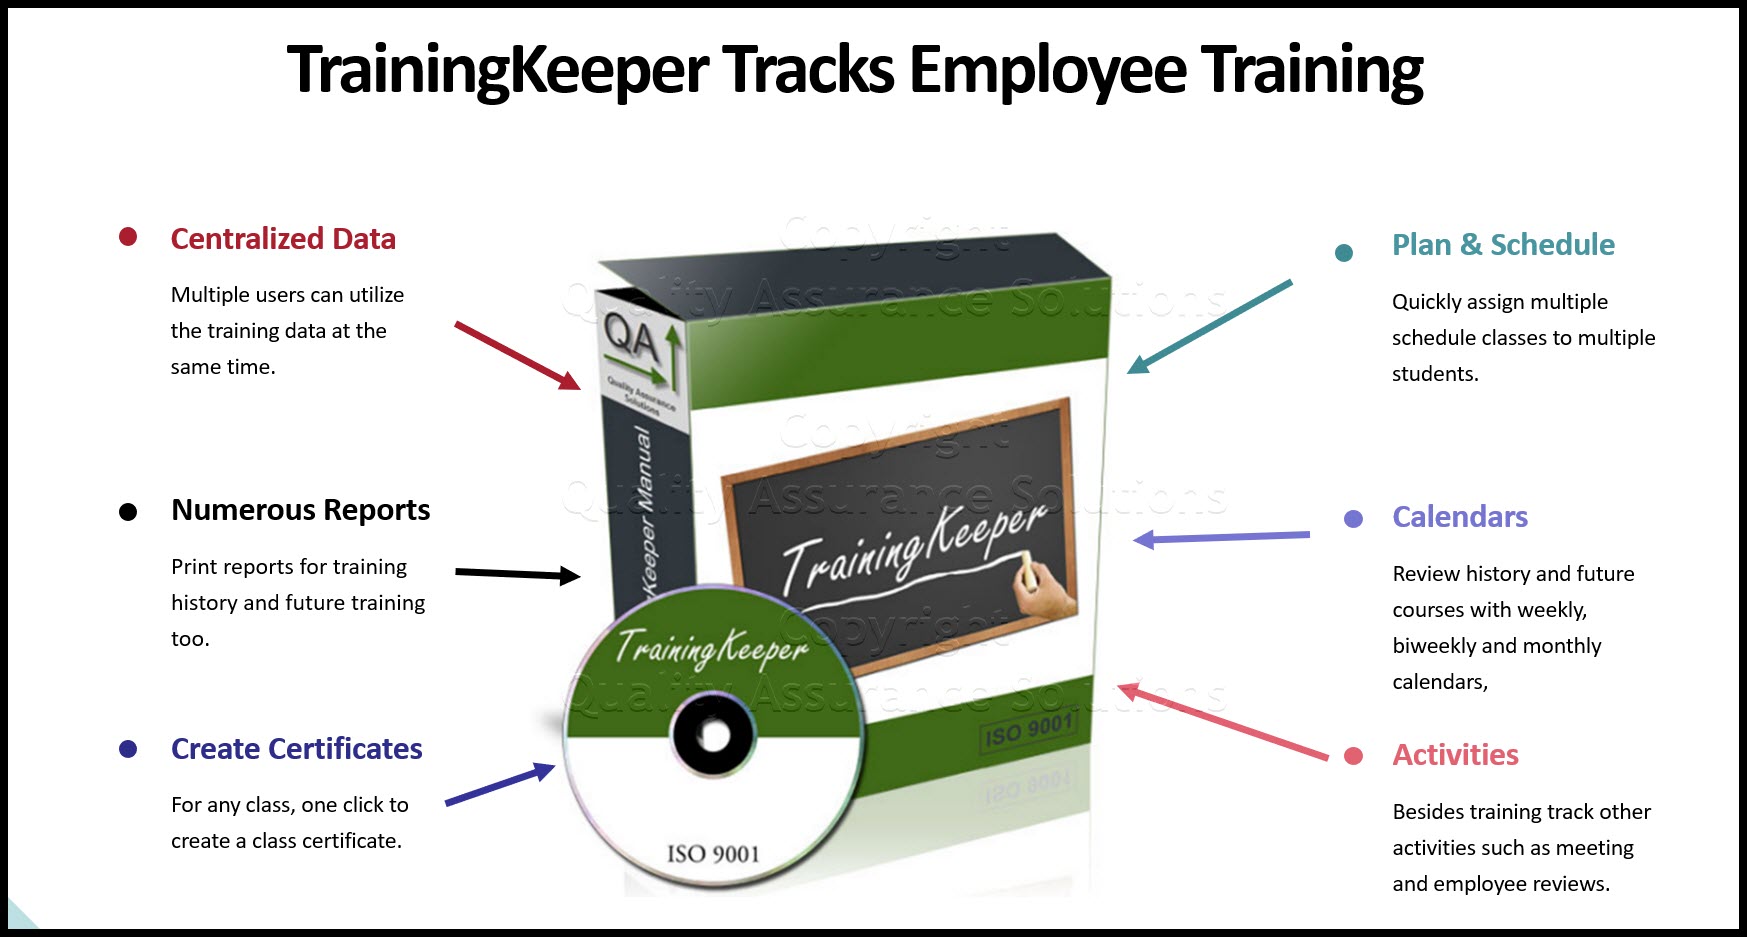 Your employee training tracking software is TrainingKeeper, Learn why training manager software is important to ISO 9001.